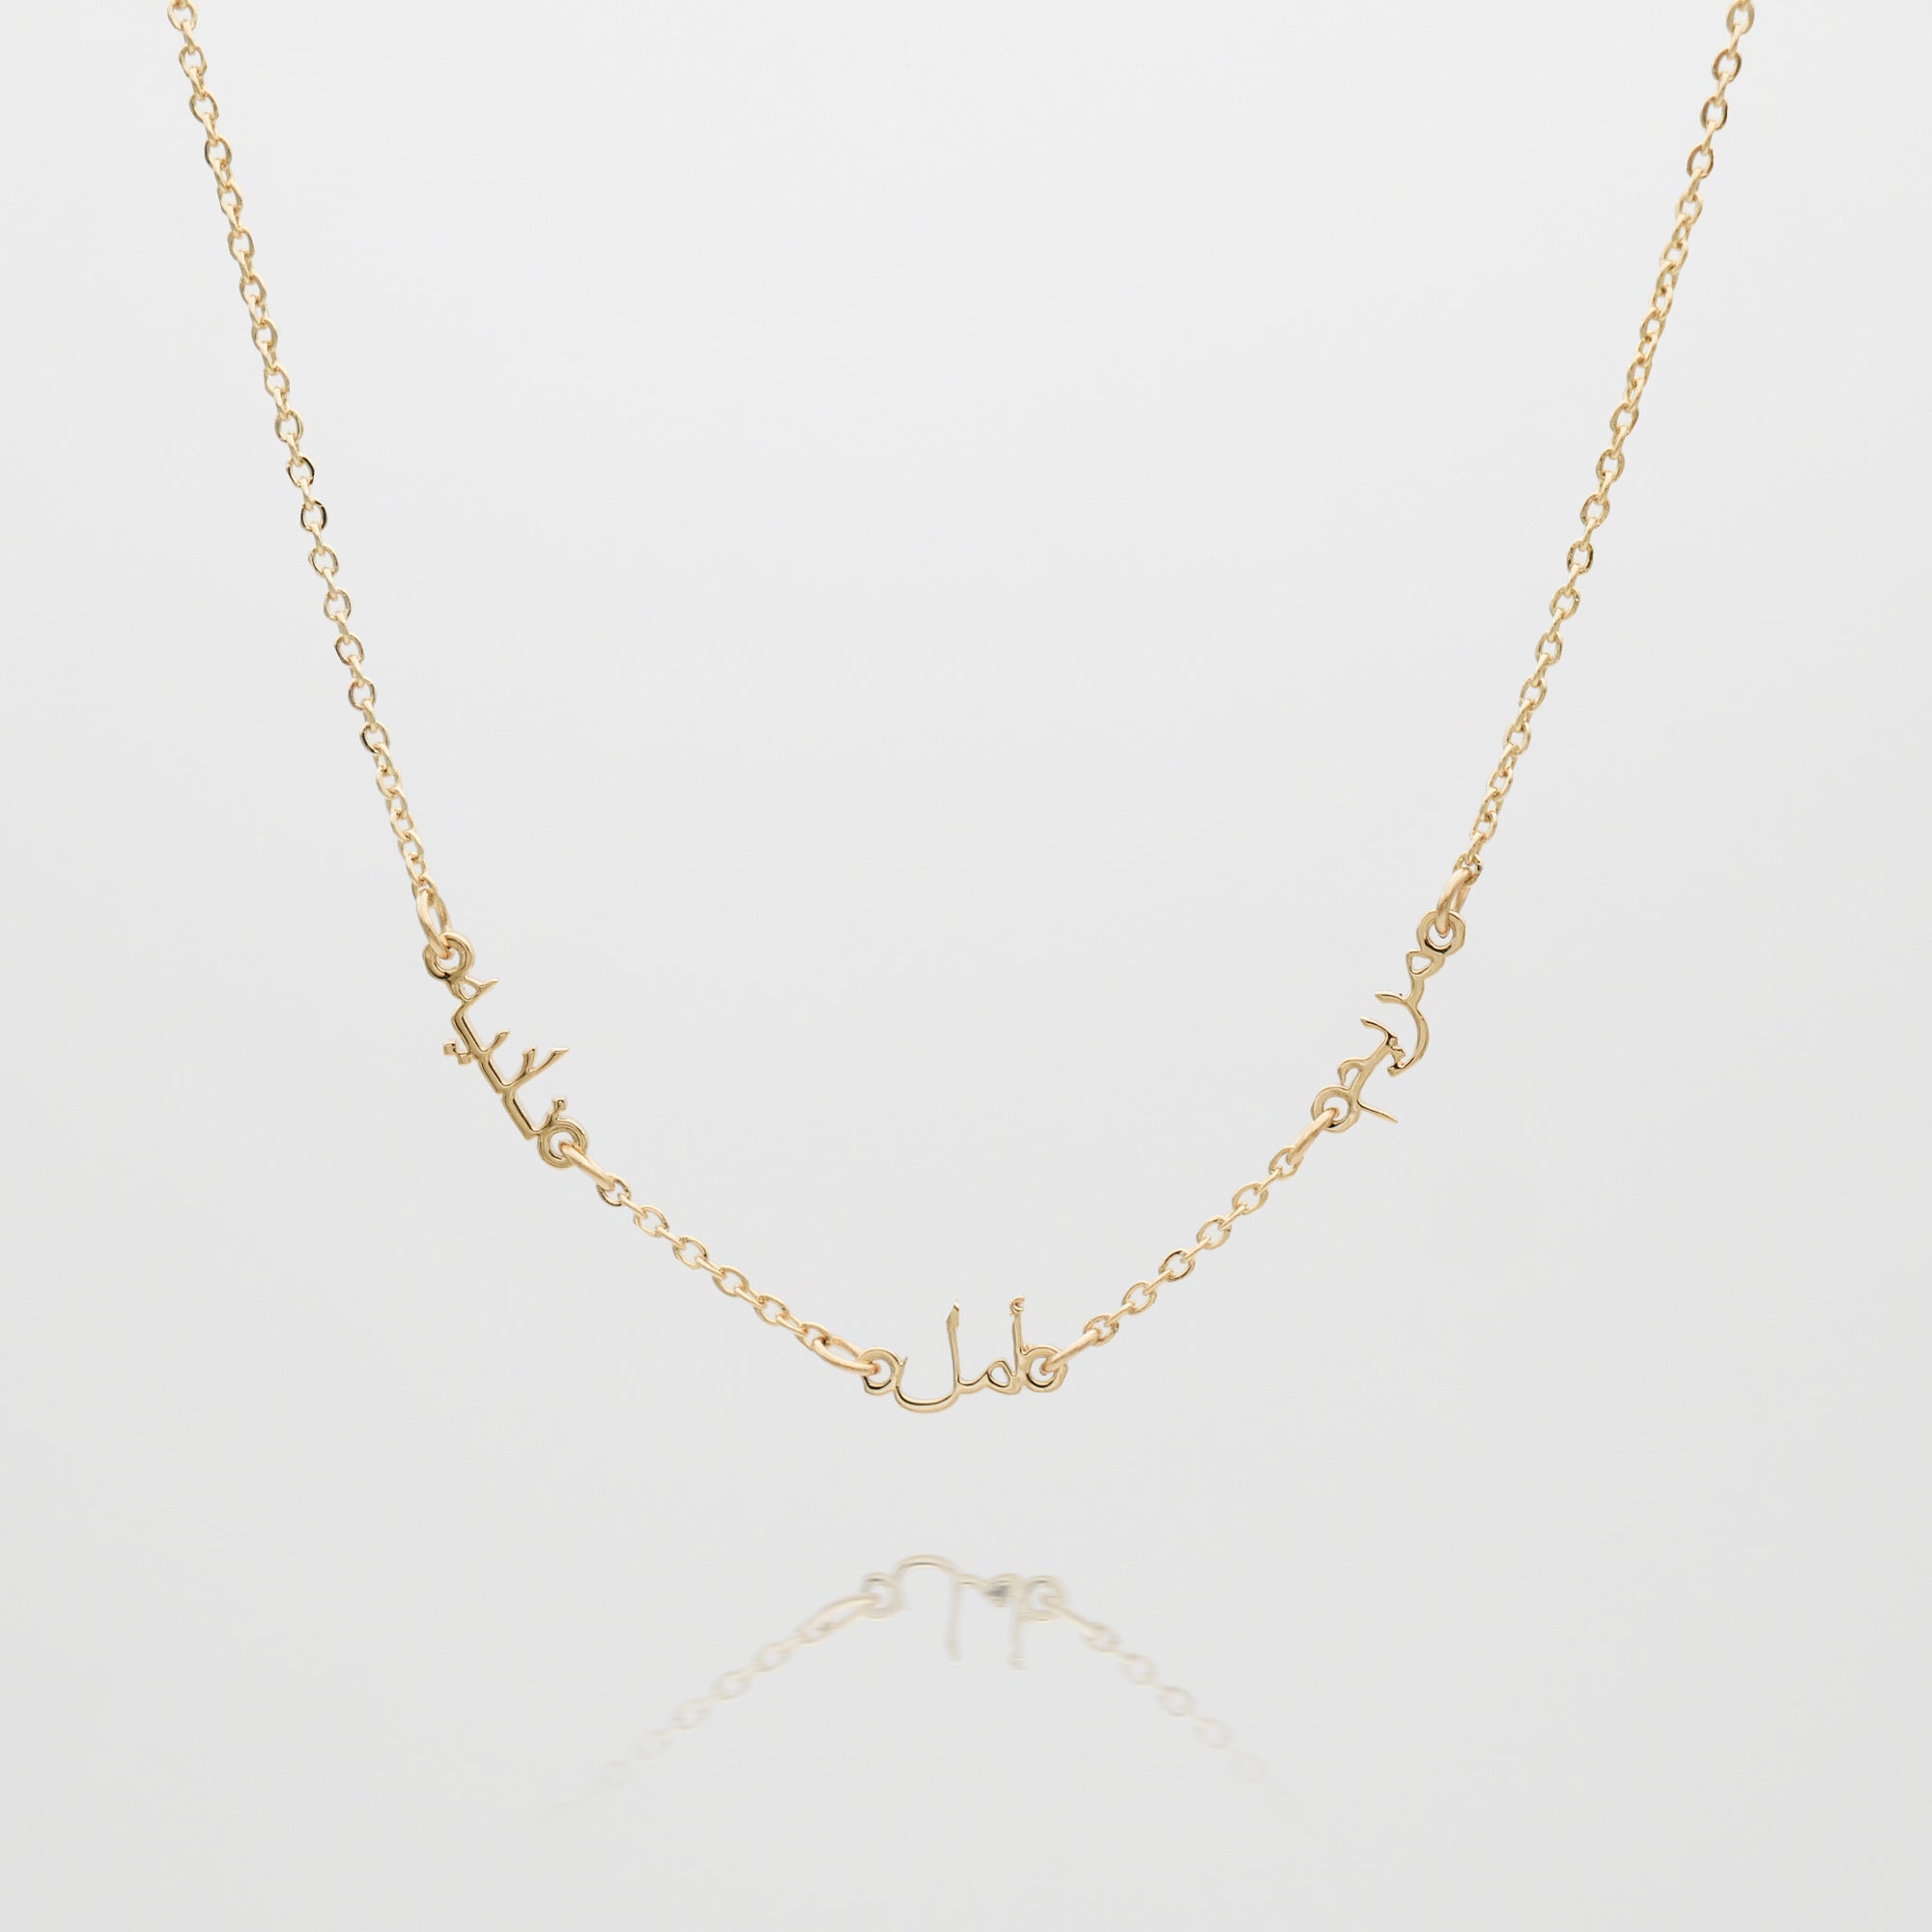 Arabic Multiple Name Necklace